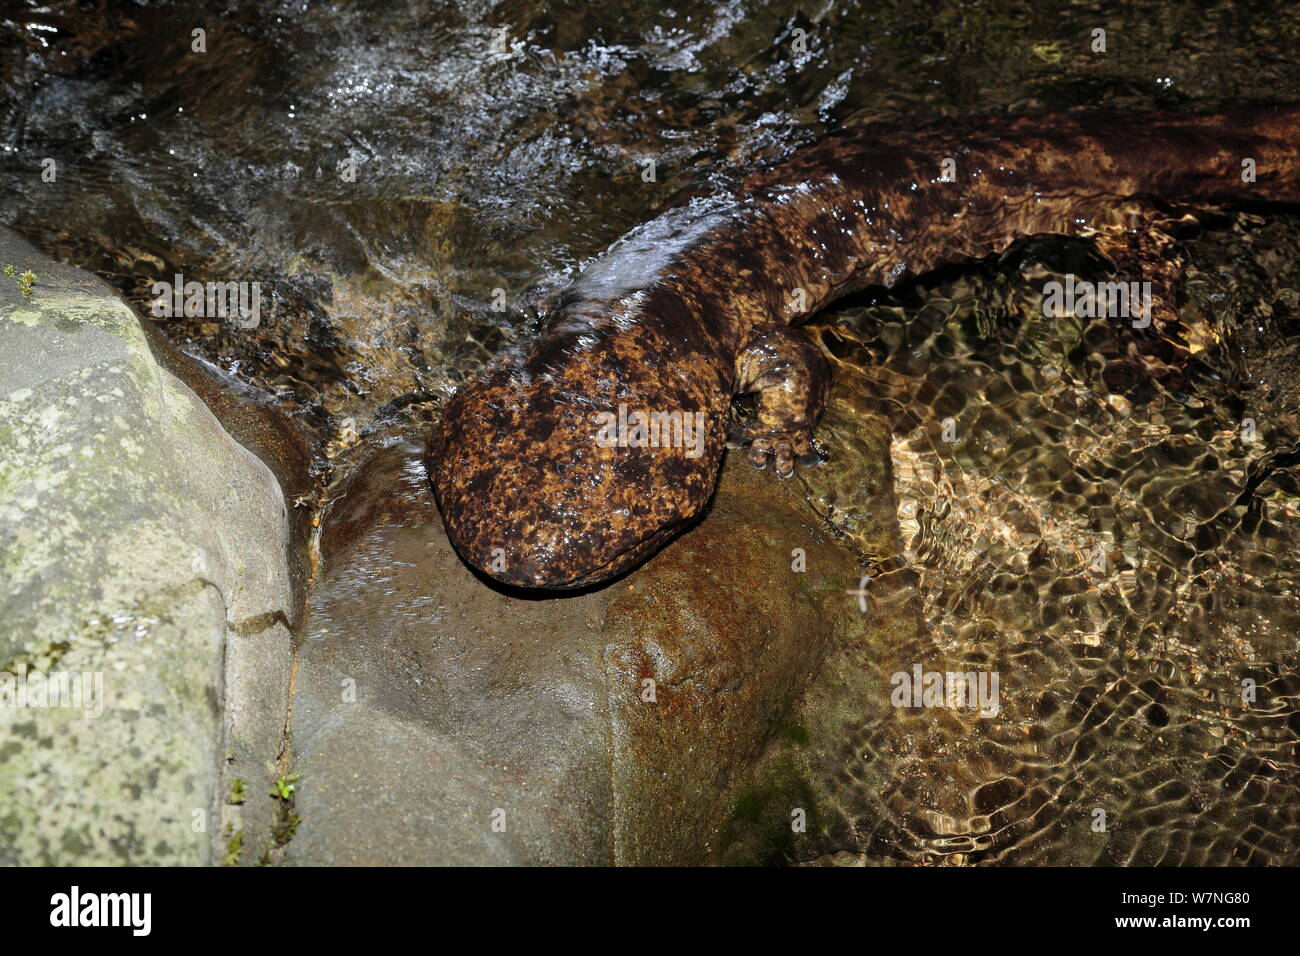 Japanese giant salamander (Andrias japonicus) resting during migration upstream to spawn, Japan, August Stock Photo